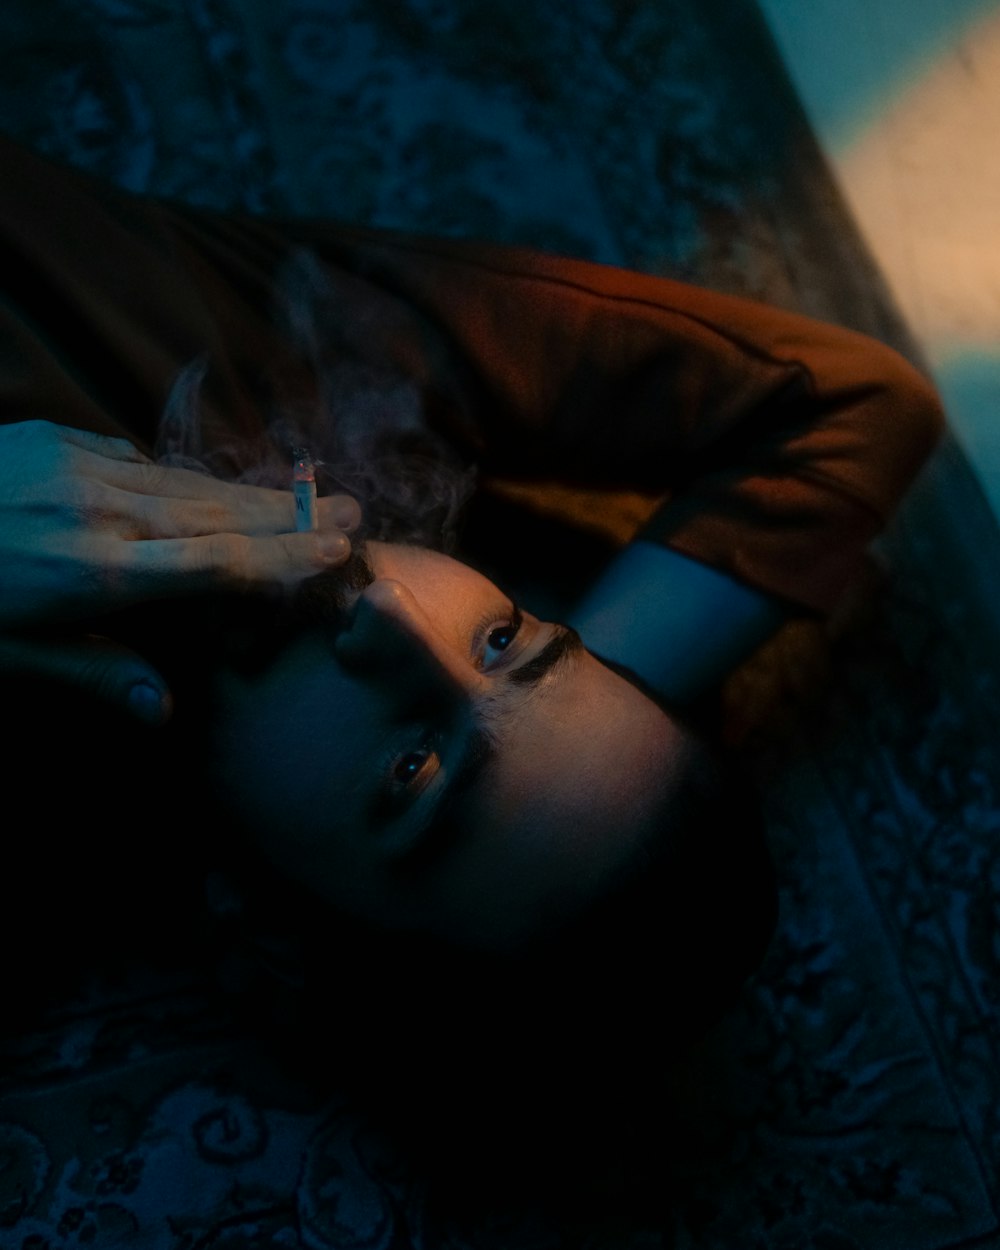 a person laying on the floor with a cigarette in their mouth